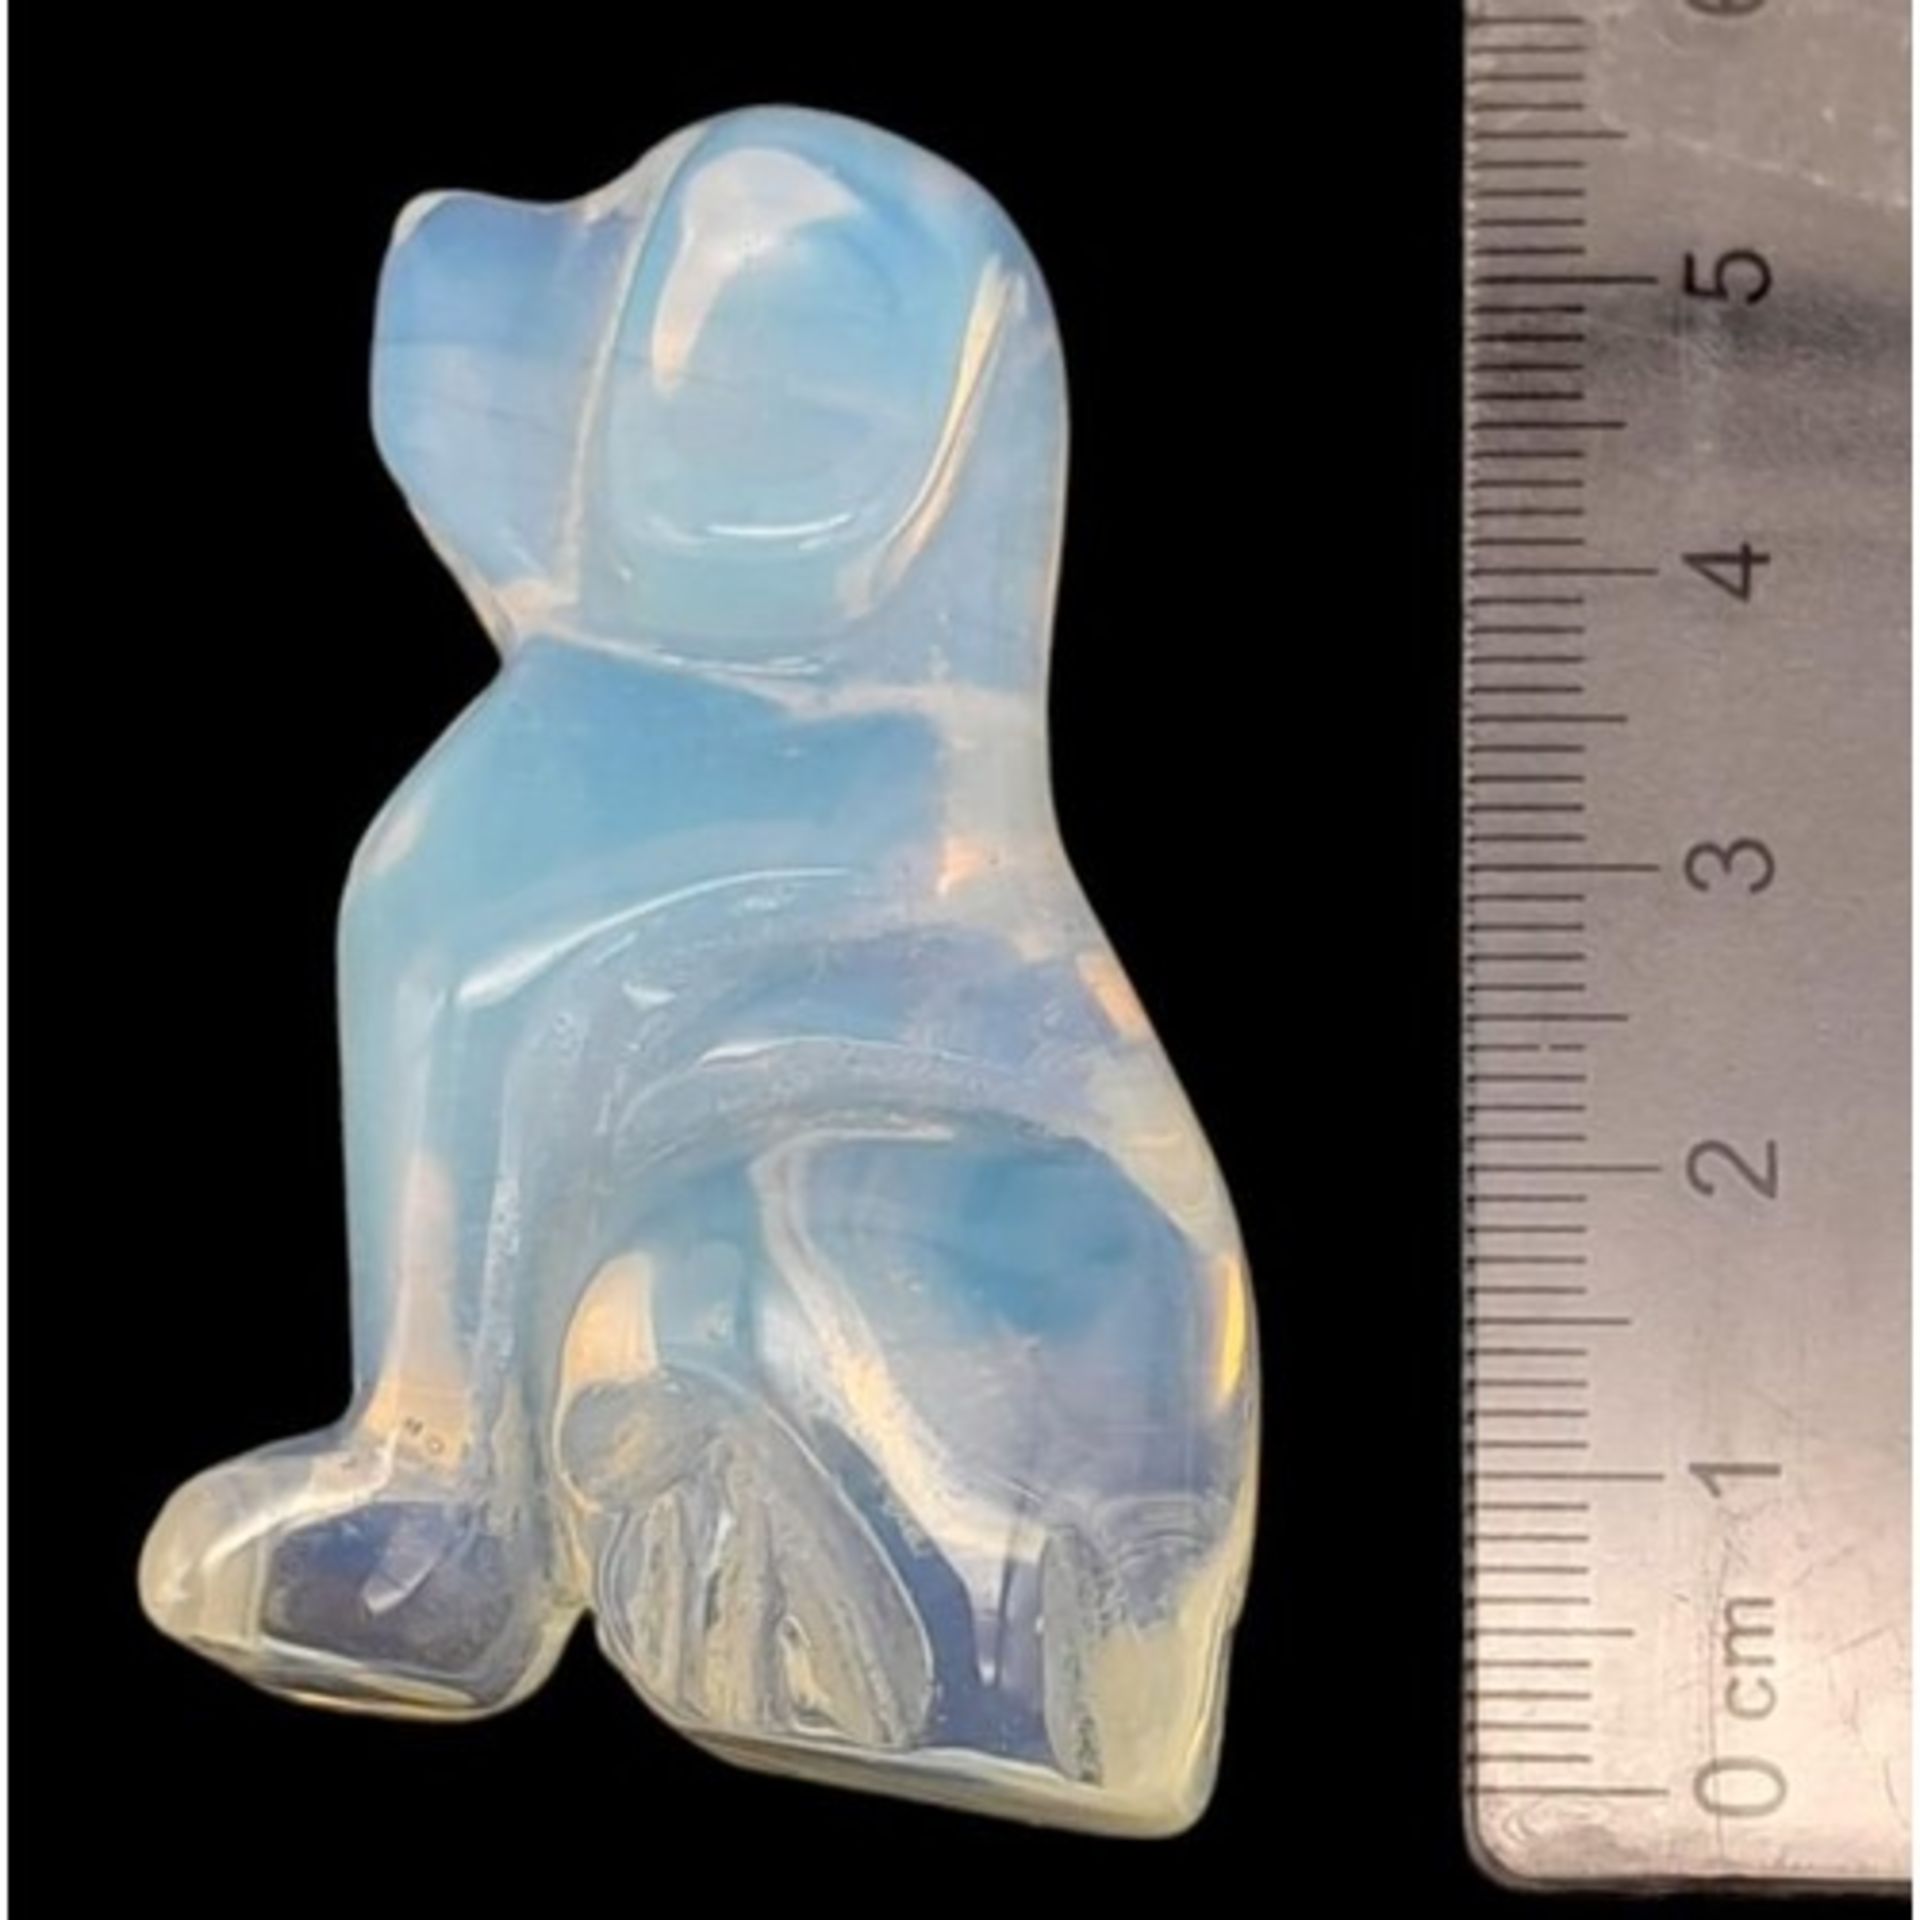 Parcel of 4 Opalite Figurines Featuring a Dog, Skull, Heart & Moon. - Image 3 of 4